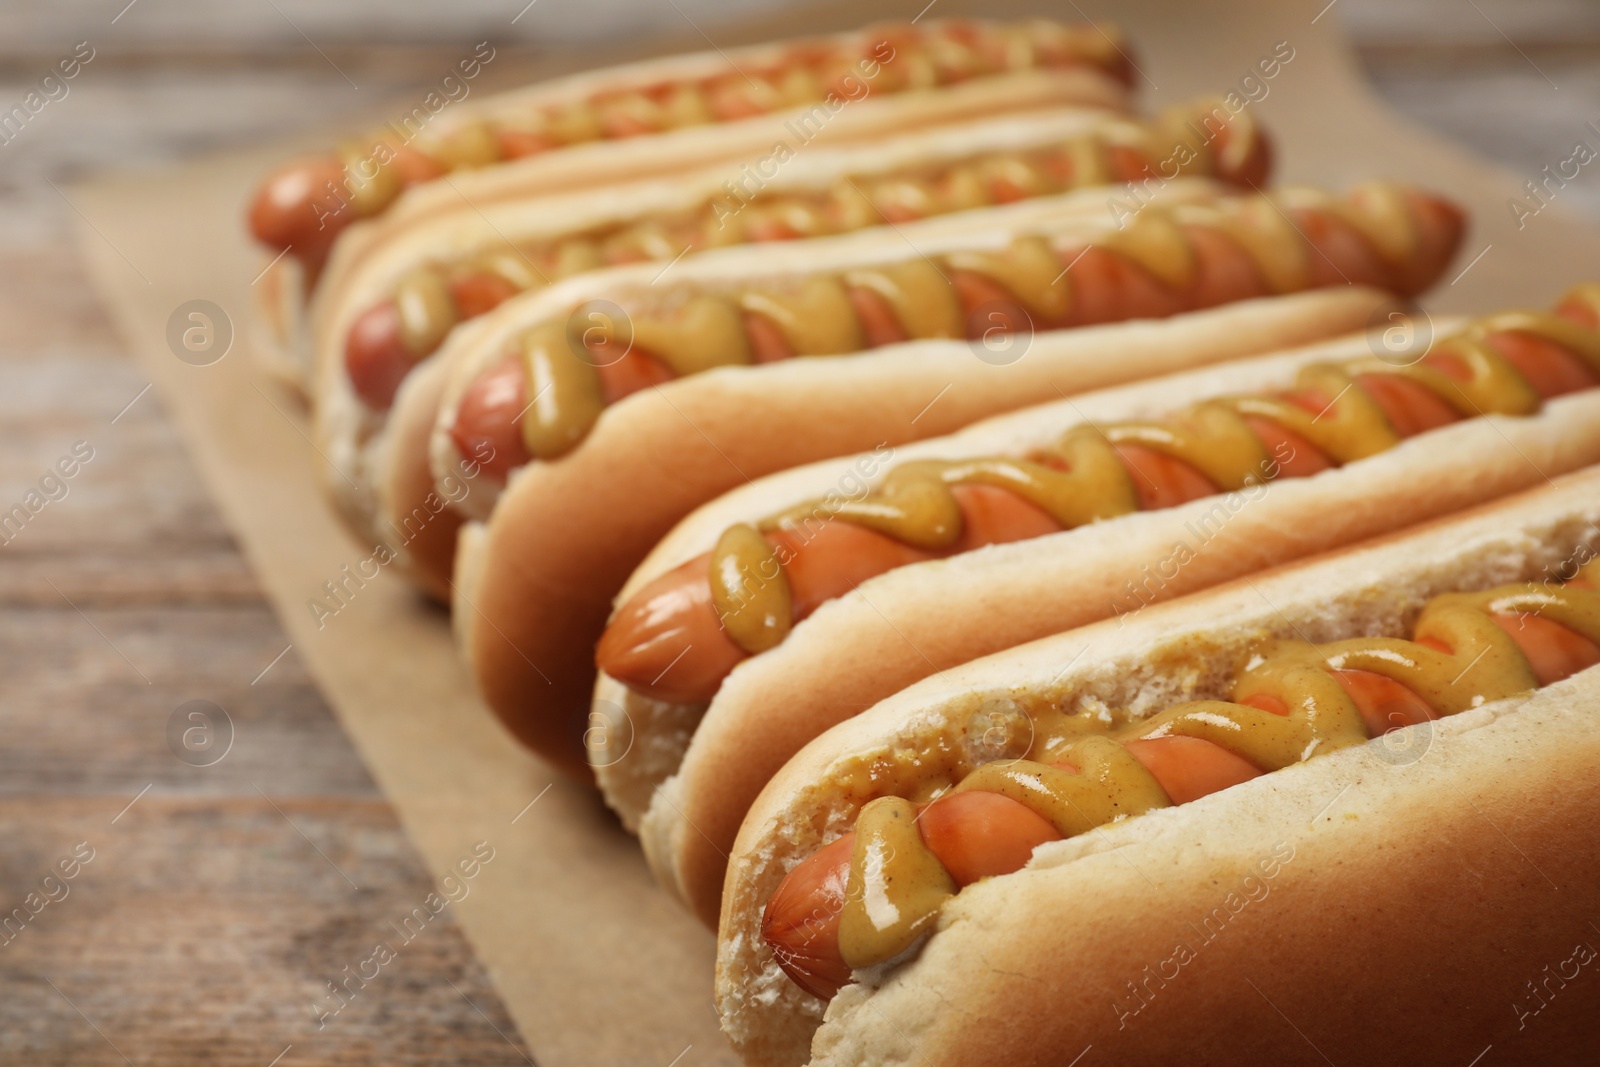 Photo of Hot dogs with mustard on wooden table, closeup